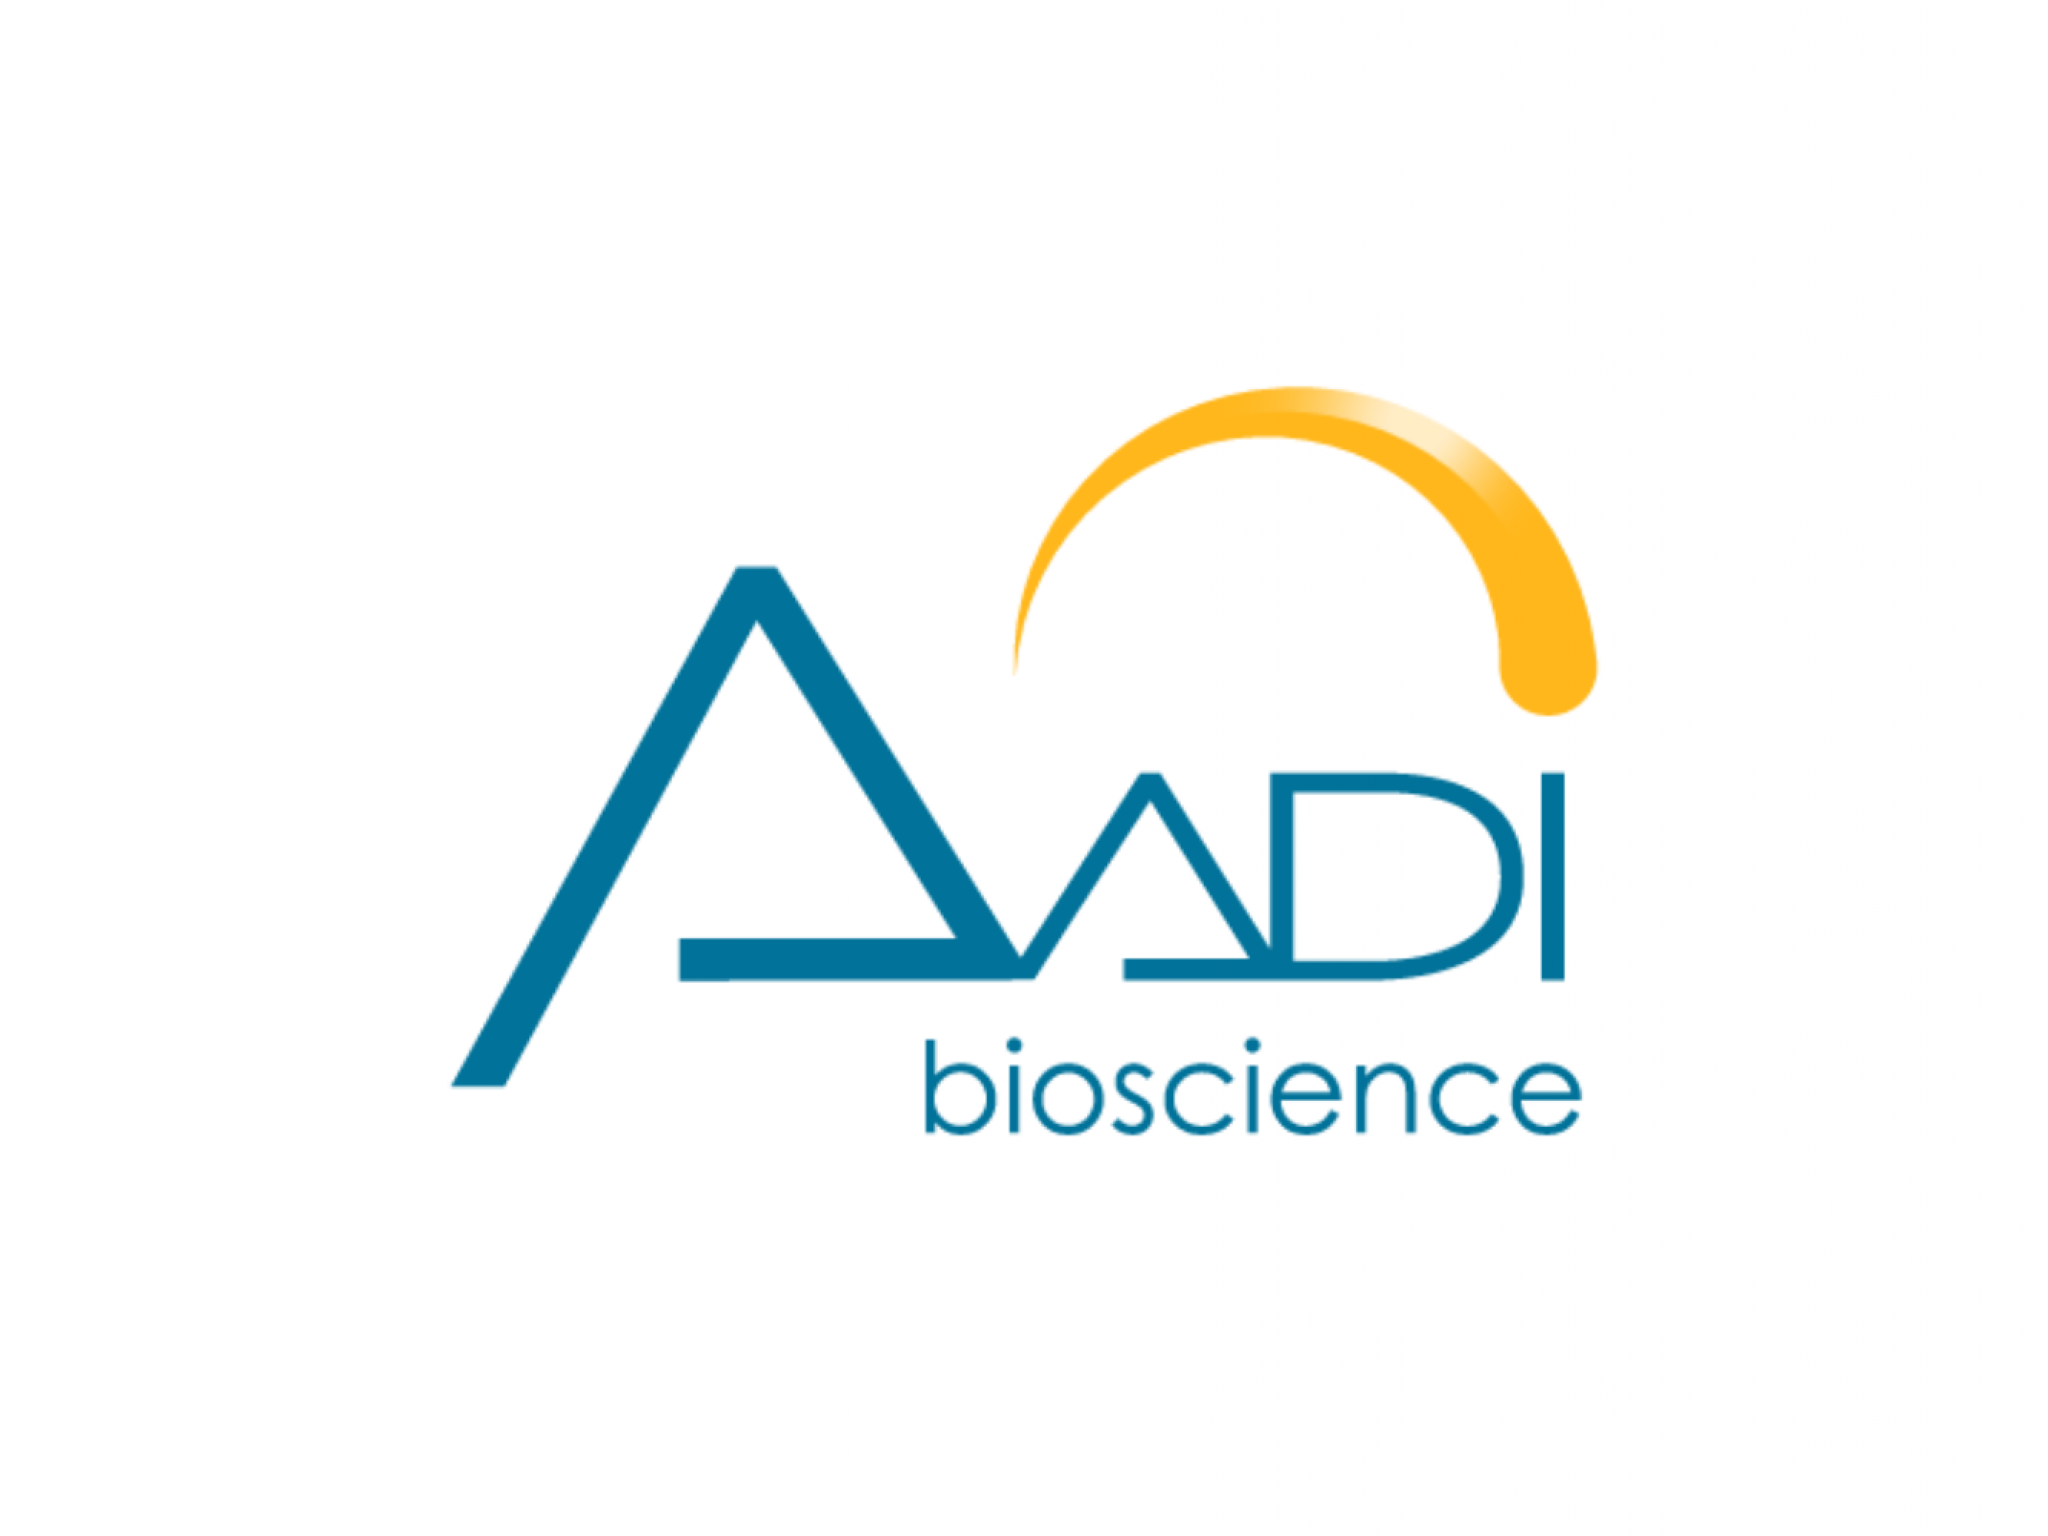  why-is-anti-cancer-focused-aadi-bioscience-stock-trading-lower-today 